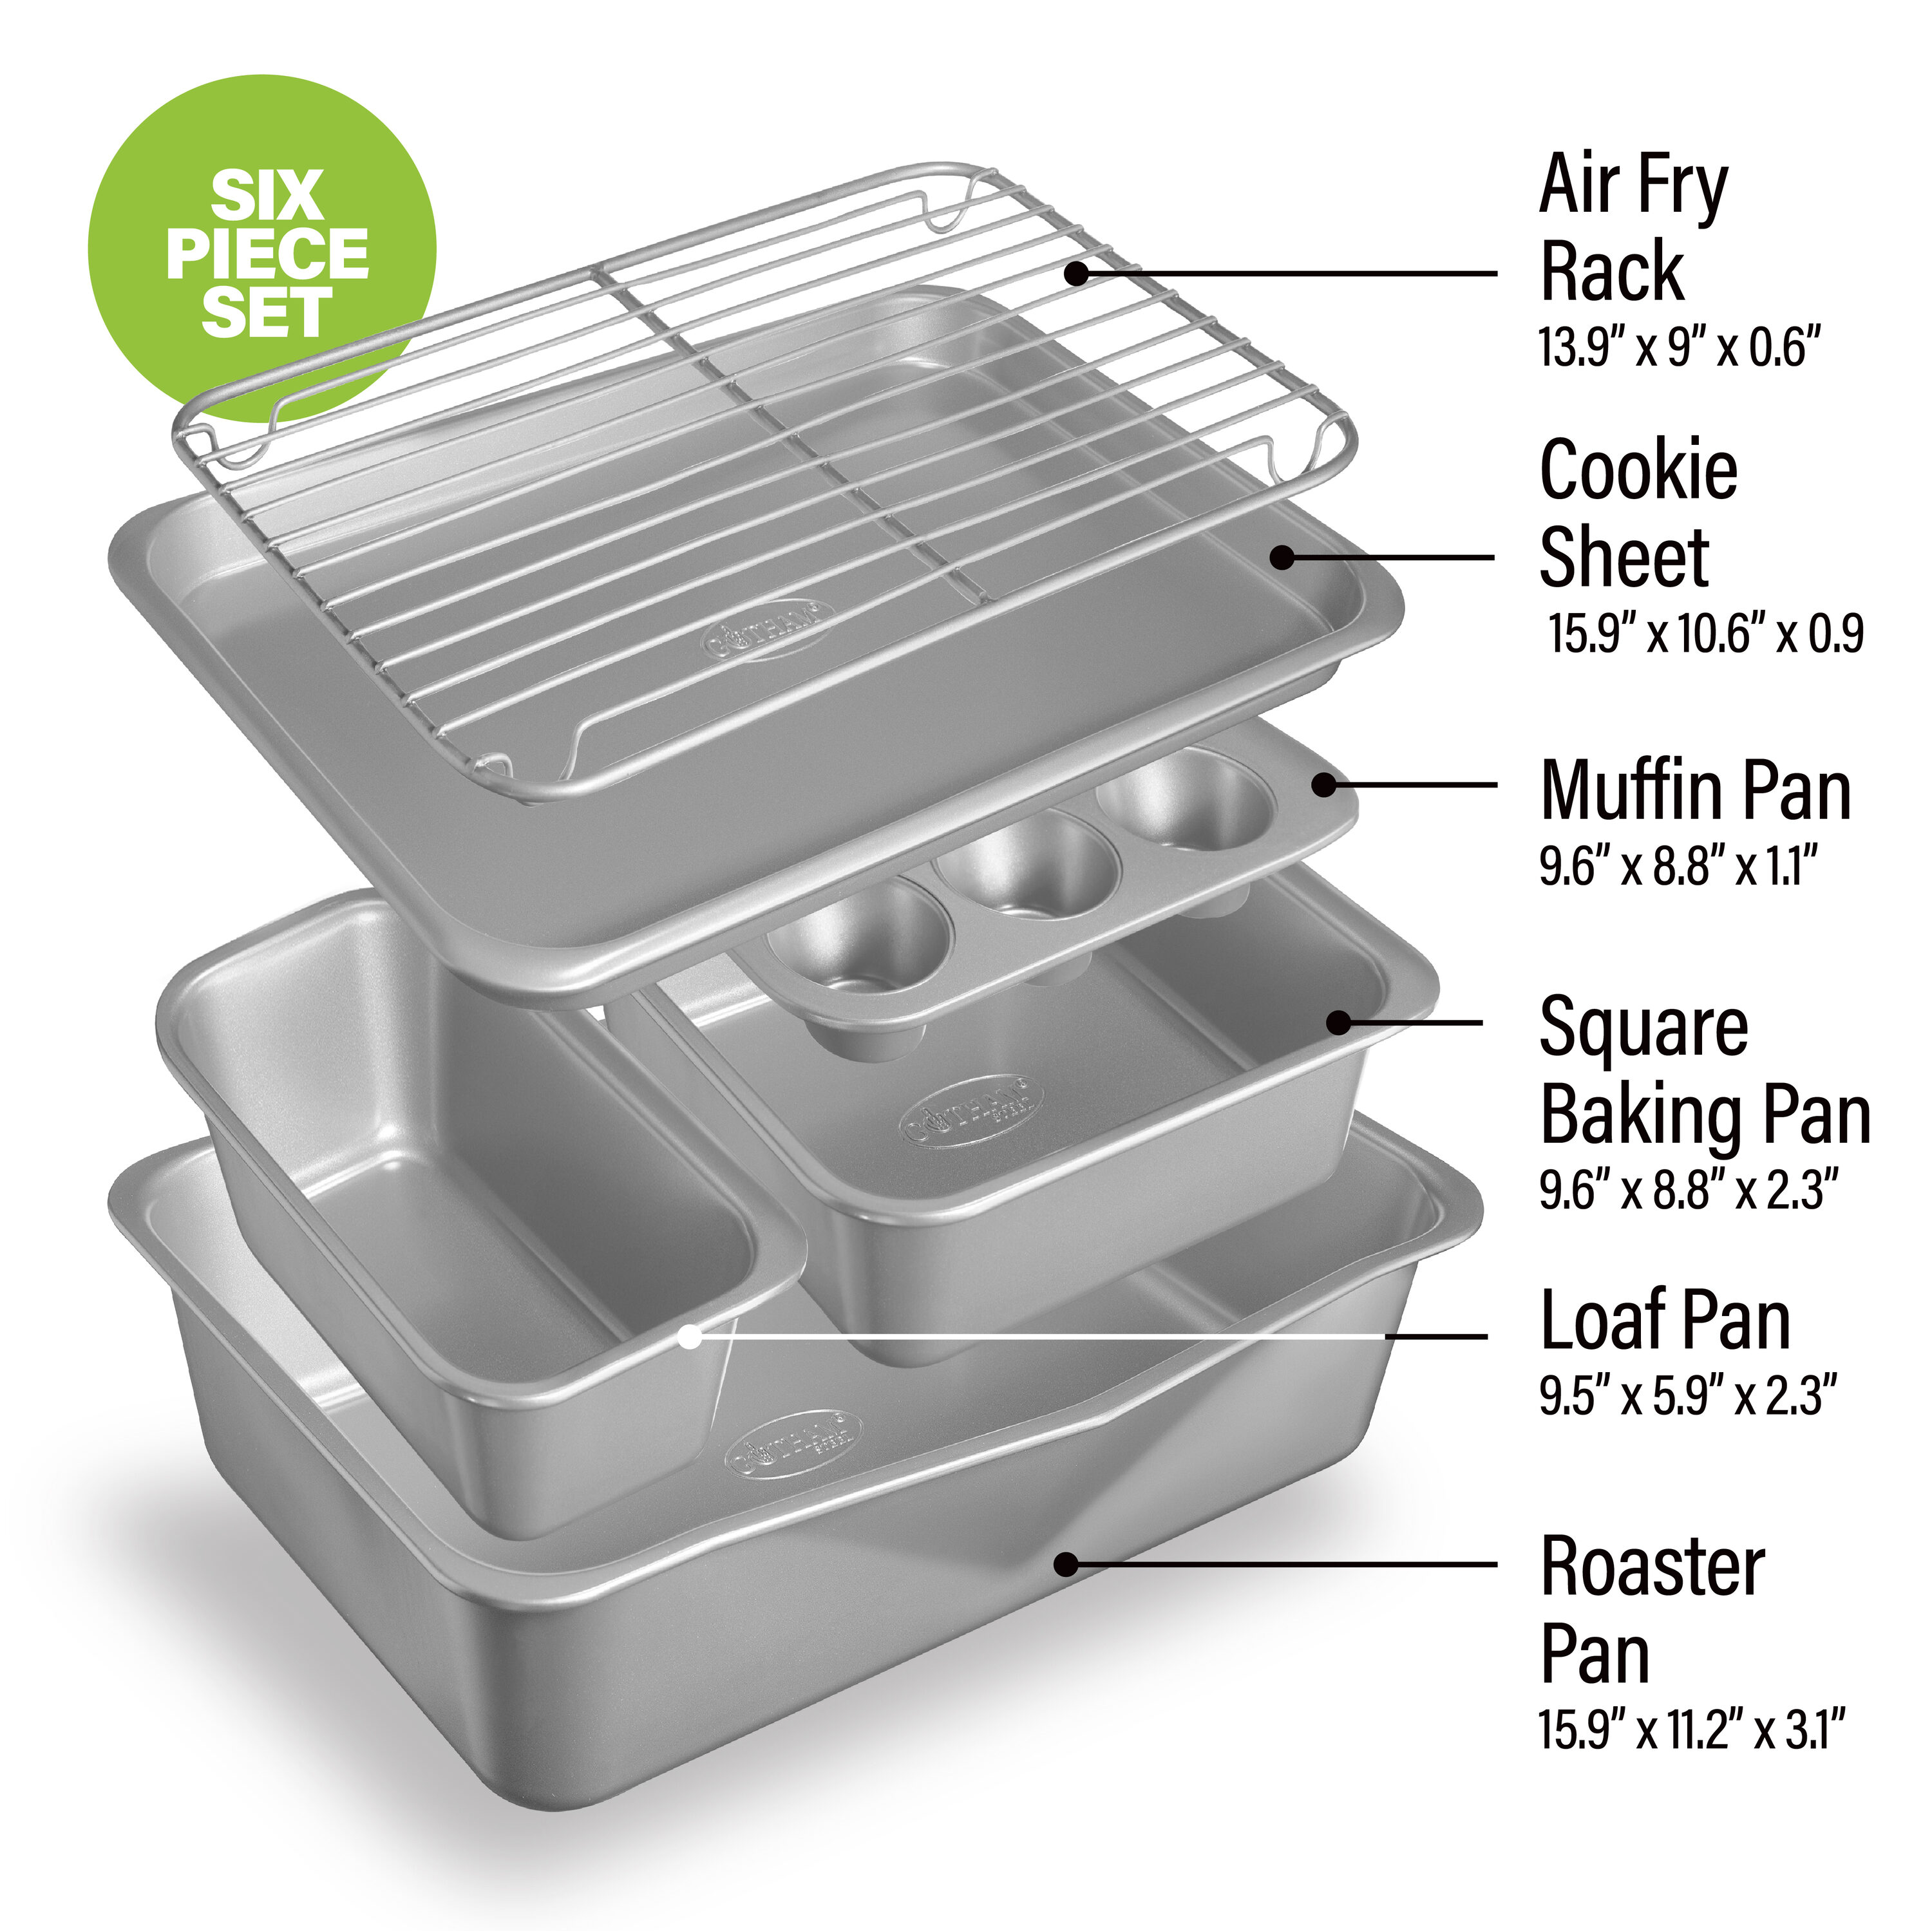 Nutrichef 8-Piece Nonstick Stackable Bakeware Set Baking Tray Set w/ Non-Stick Coating (Gray)